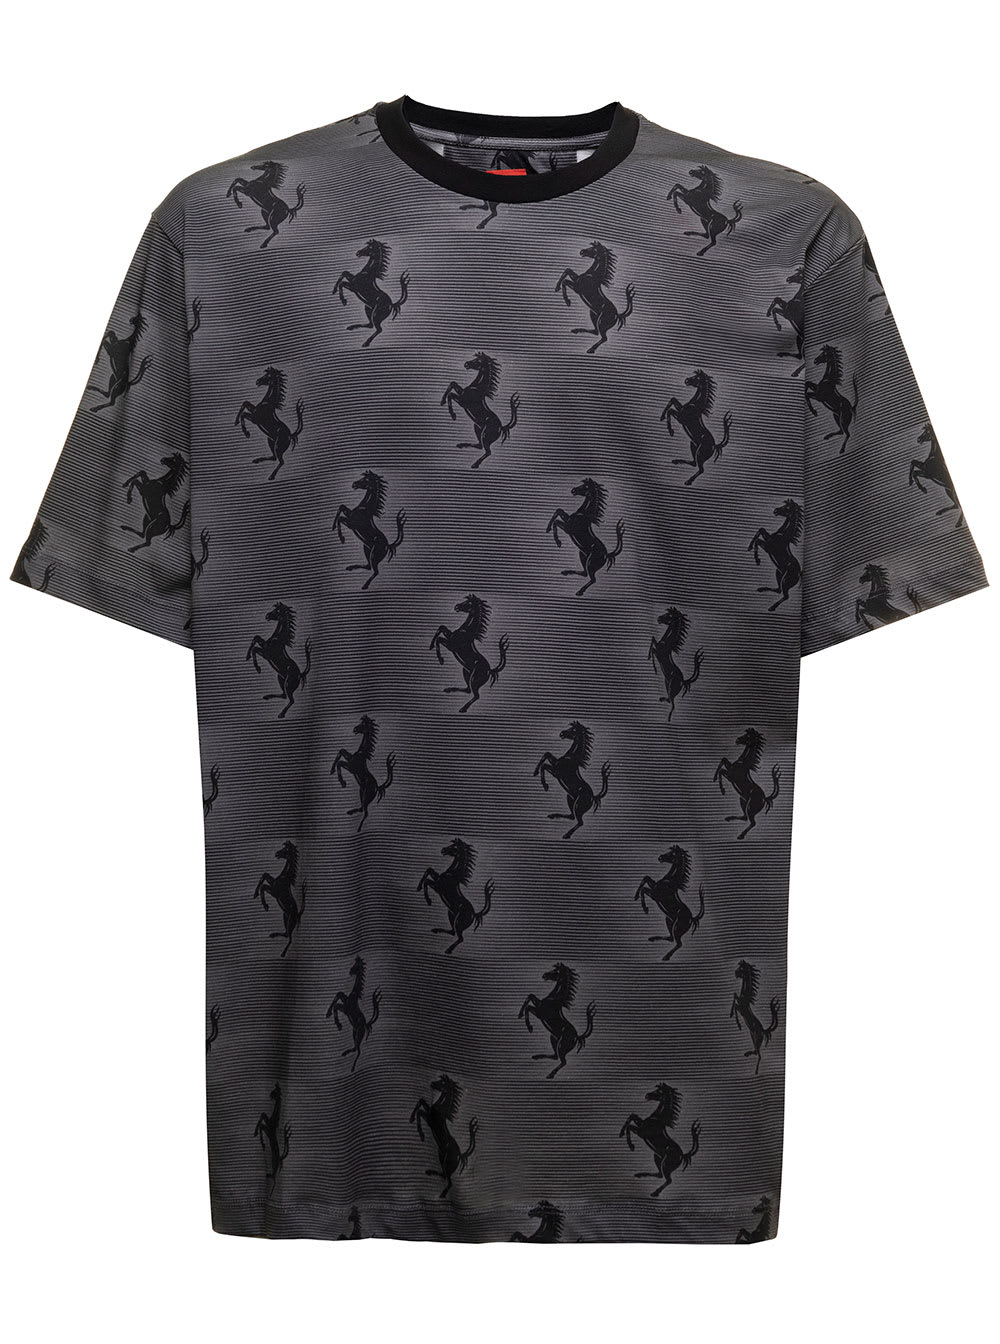 FERRARI BLACK AND GREY T-SHIRT IN JERSEY COTTON WITH ALLOVER PRINTED PRANCING HORSE AND STRIPES PATTERN FERR